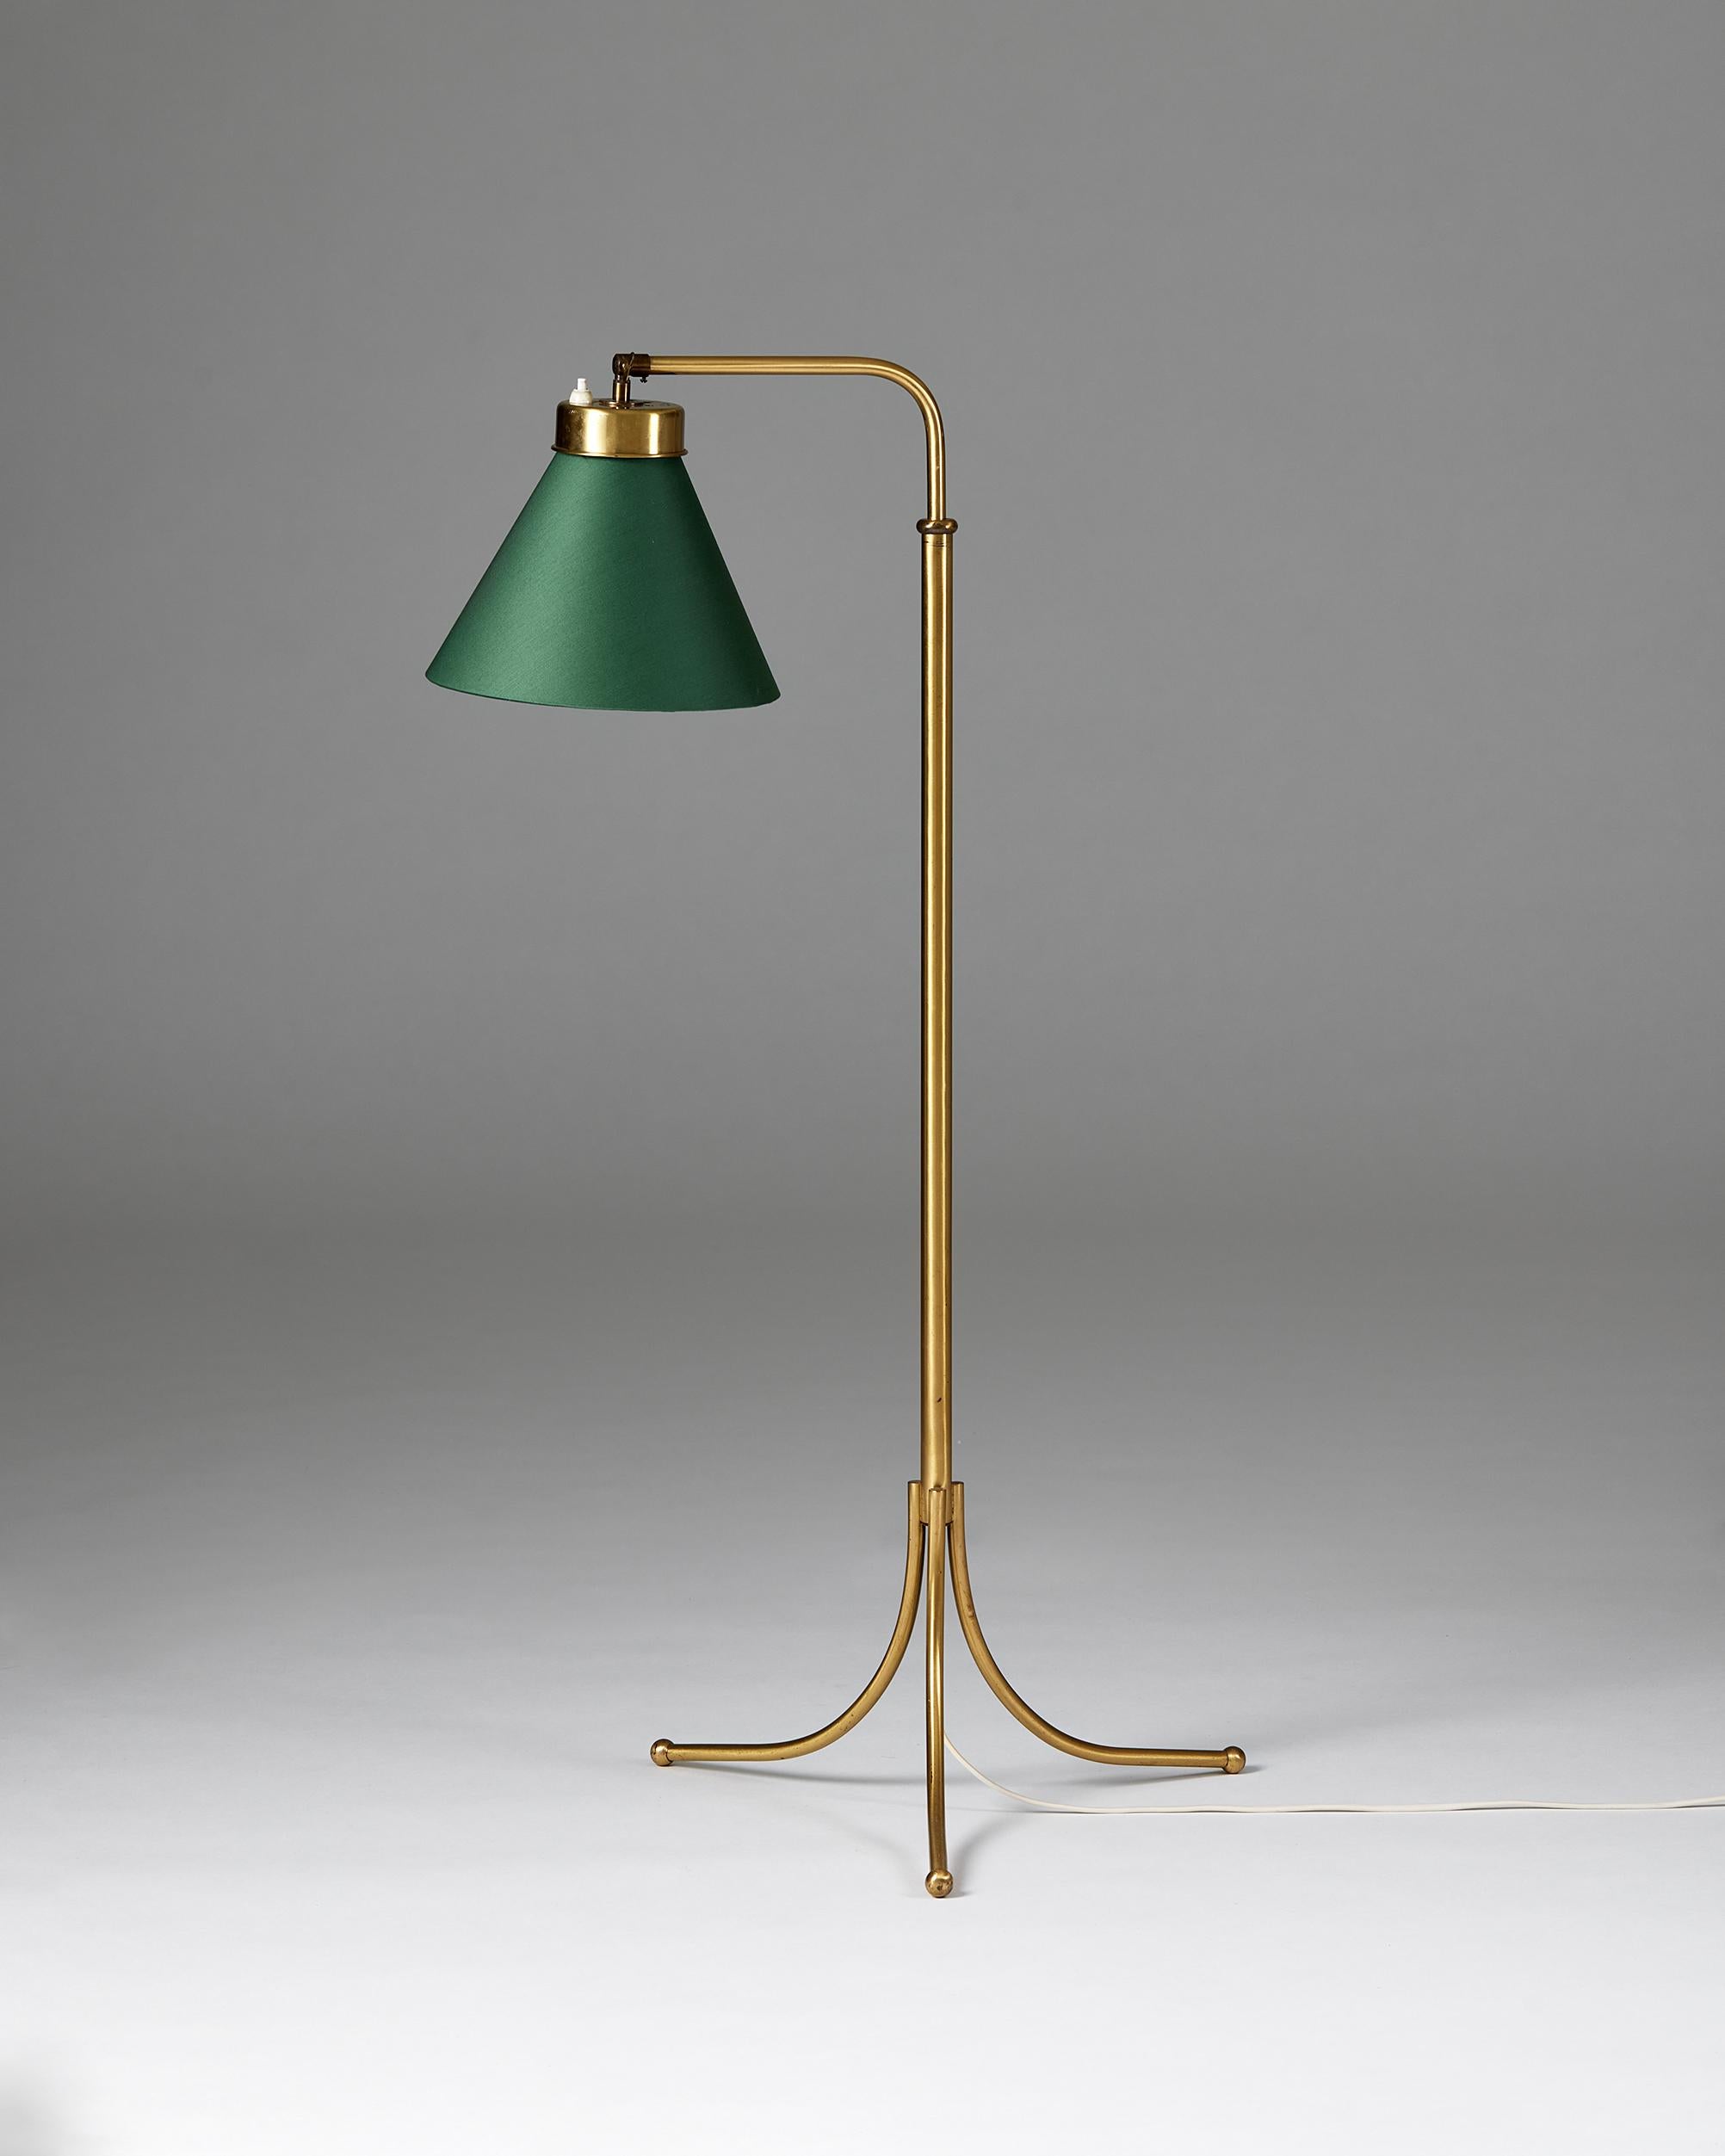 Floor lamp model 1842 designed by Josef Frank for Svenskt Tenn,
Sweden, 1932.

Brass.

Measures: 
H: 102.5 cm
W: 36 cm
Shade diameter: 24 cm
Base diameter: 42 cm

Josef Frank was a true European, he was also a pioneer of what would become classic